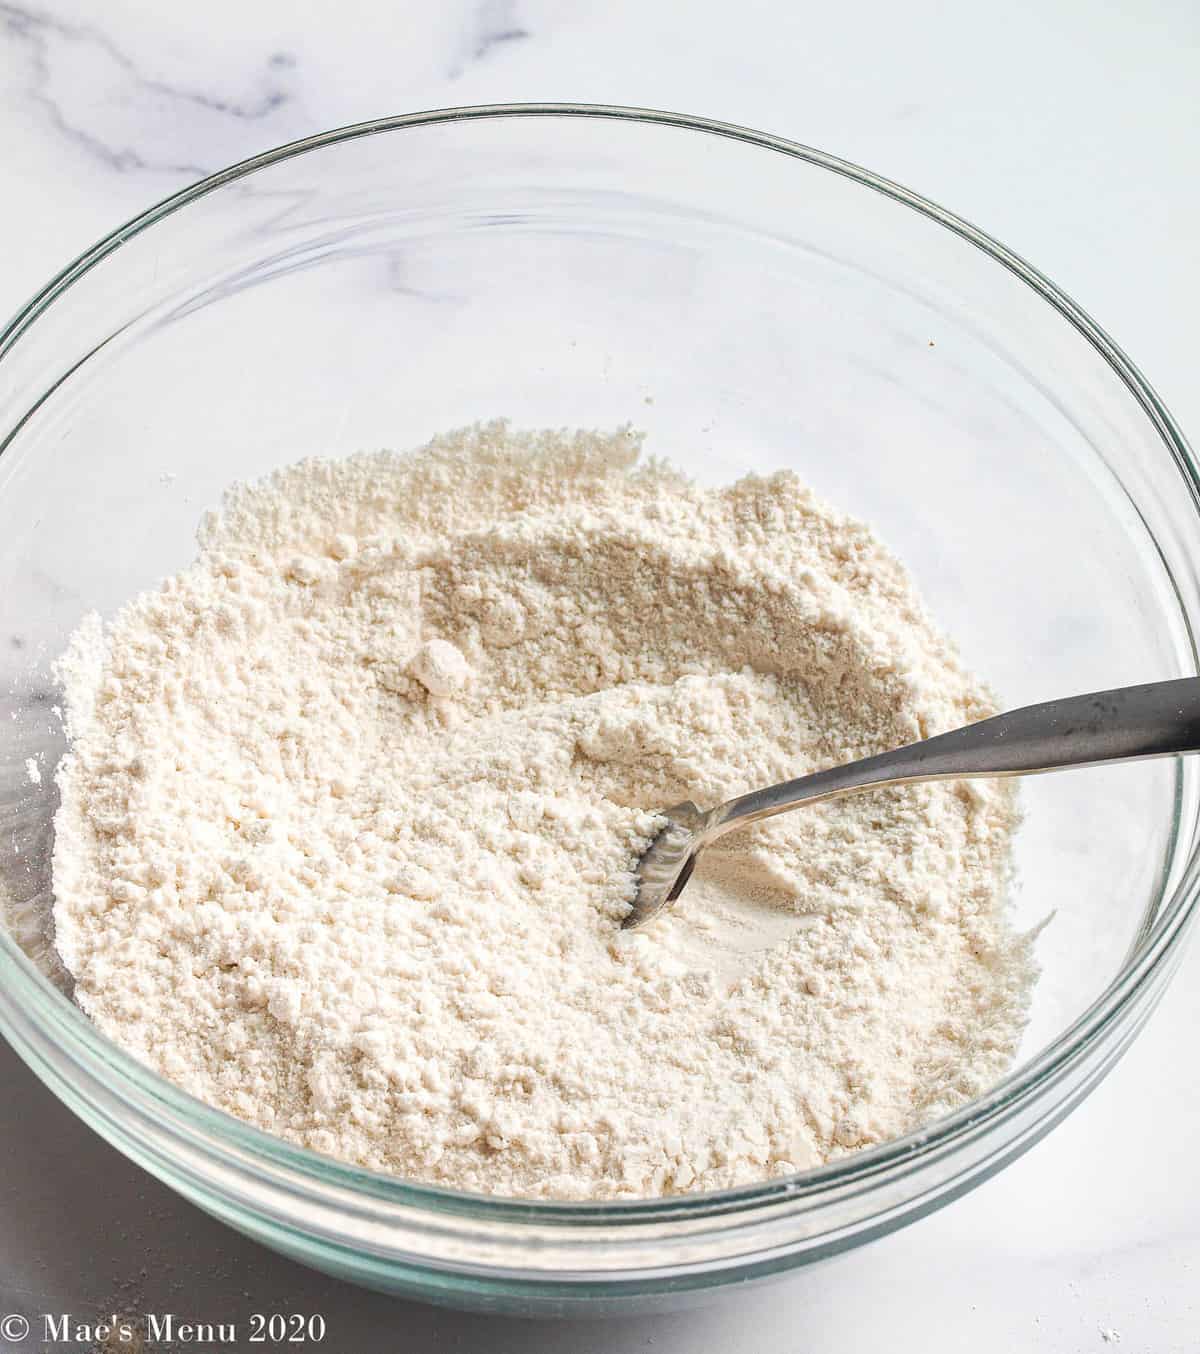 Whisked flour and a fork in a clear glass bowl